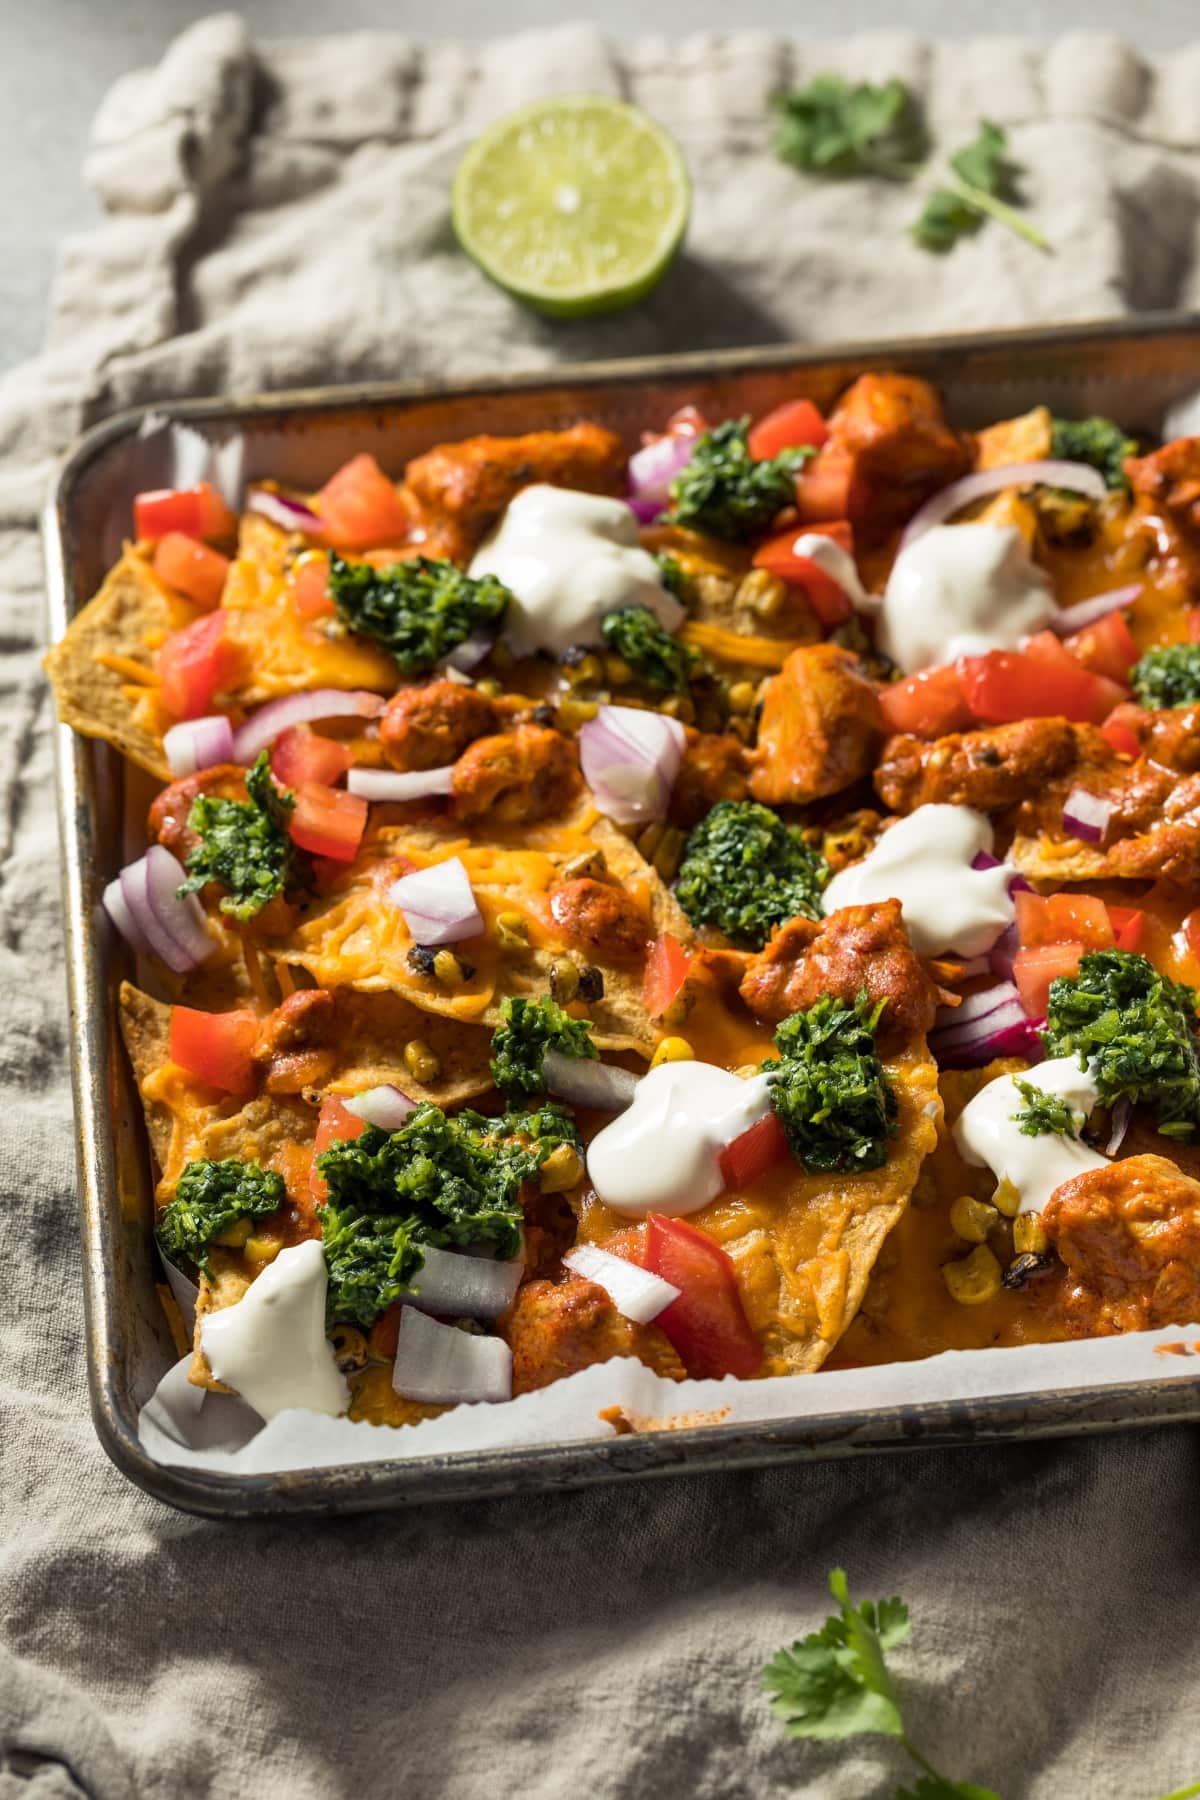 50 Easy Recipes That Will Feed a Crowd featuring Homemade Chicken Nachos with Broccoli, Onions and Tomatoes